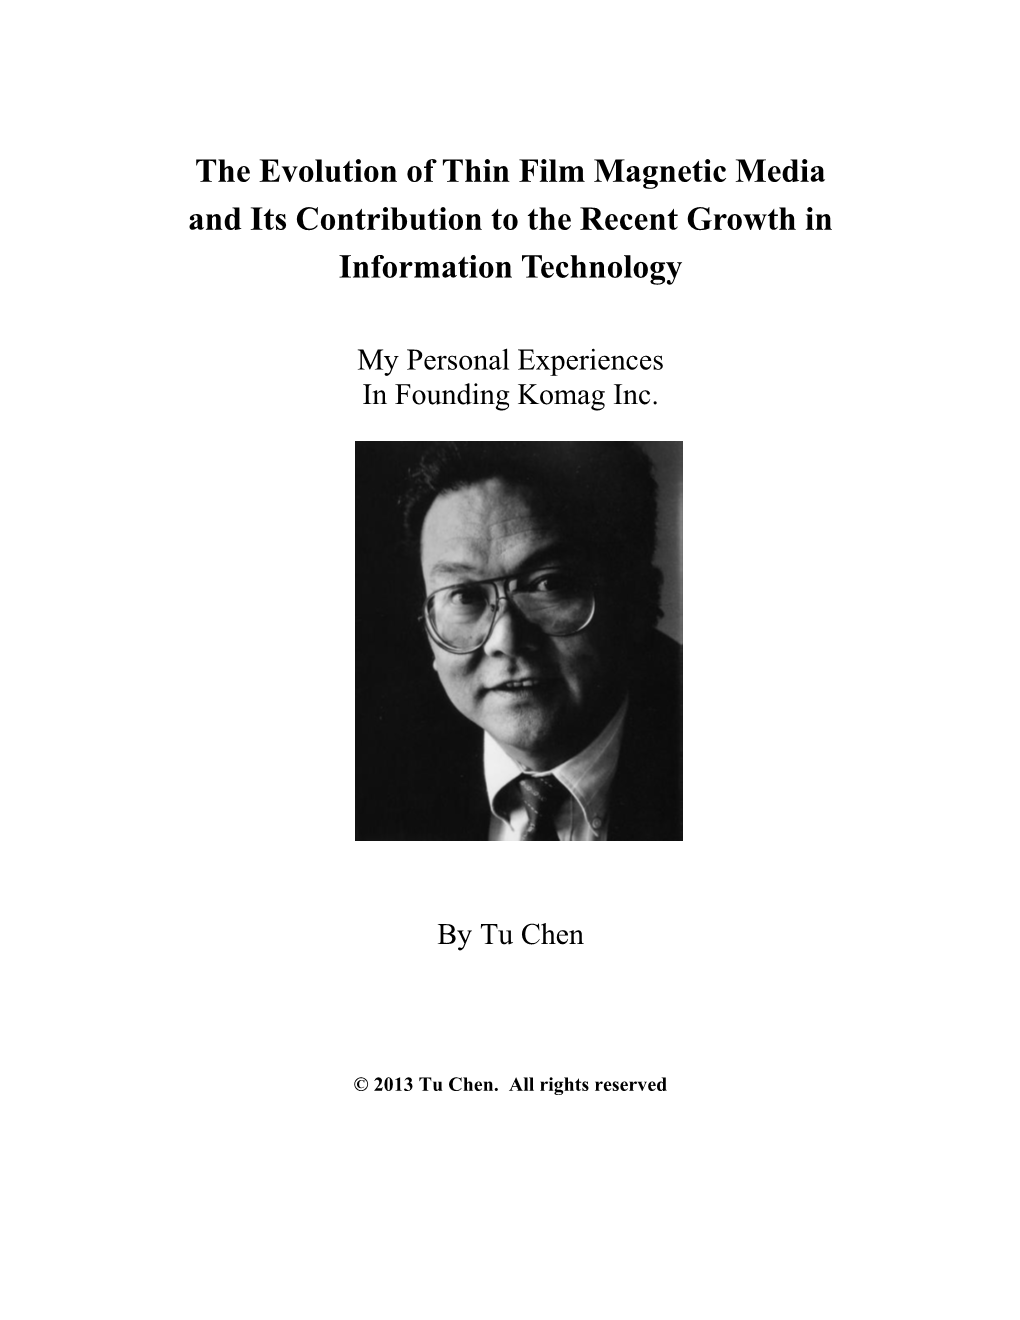 The Evolution of Thin Film Magnetic Media and Its Contribution to the Recent Growth in Information Technology